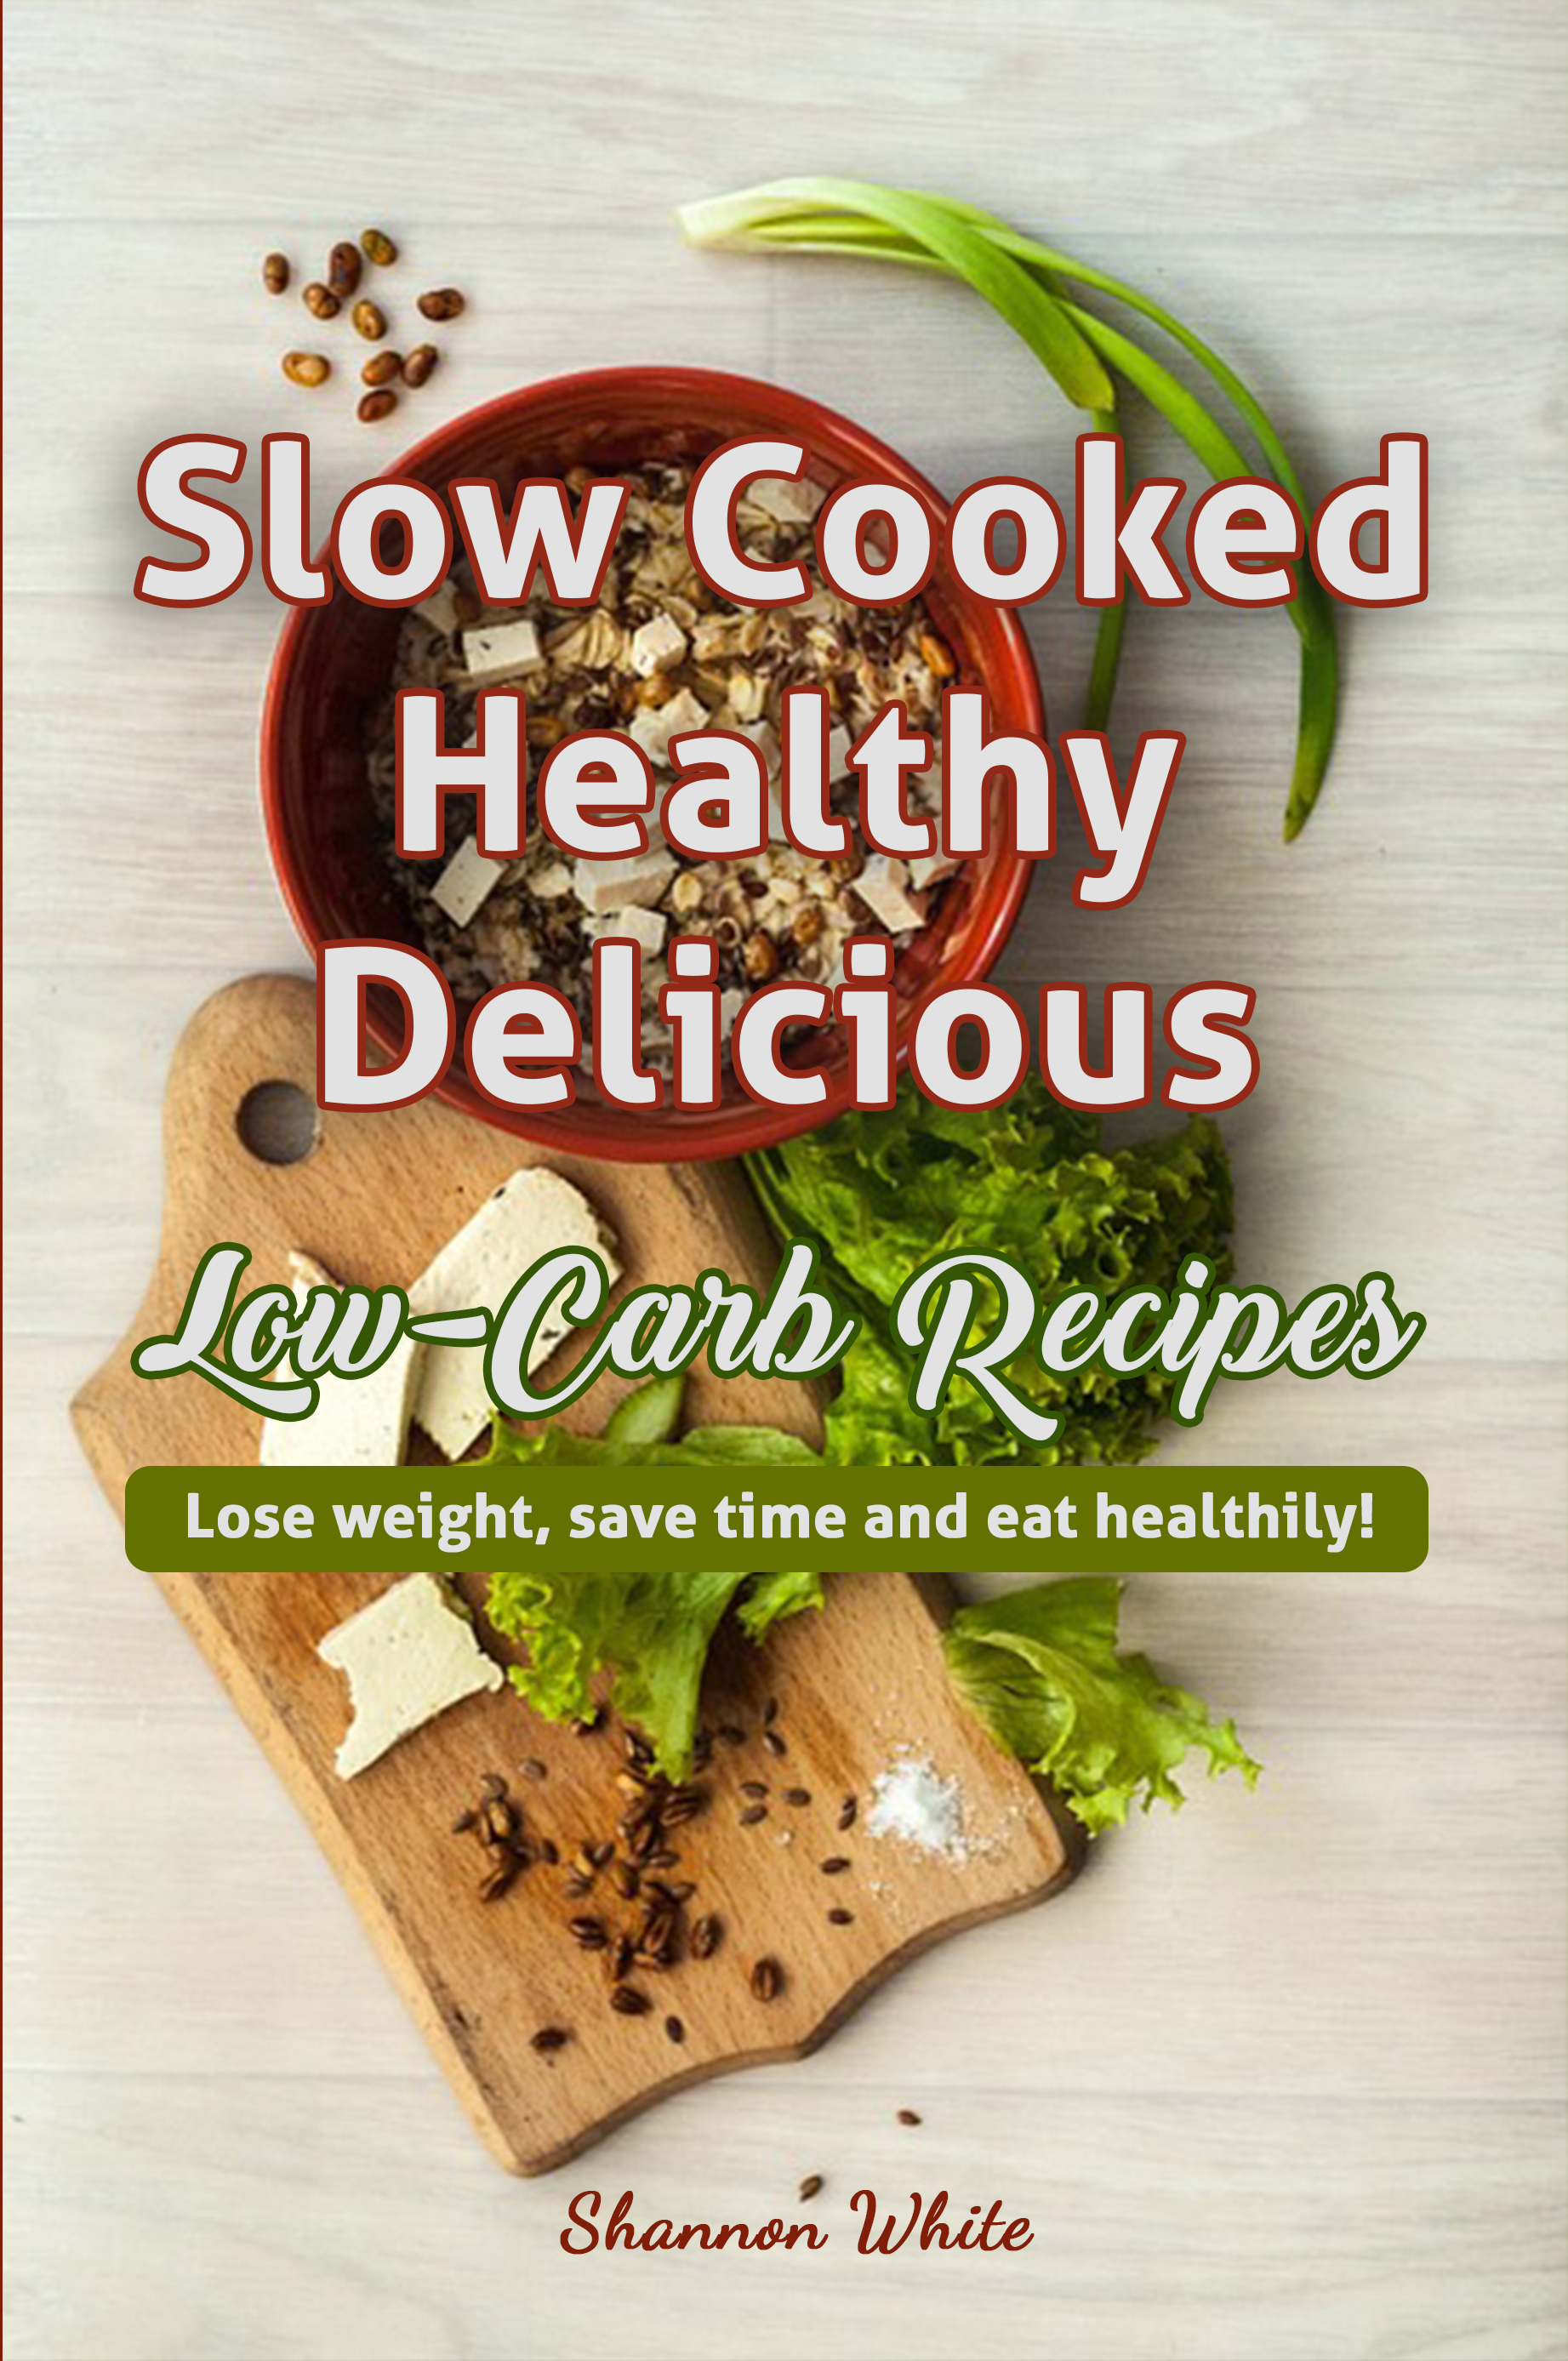 FREE: Slow Cooked, Healthy, Delicious Low-Carb Recipes by Shannon White